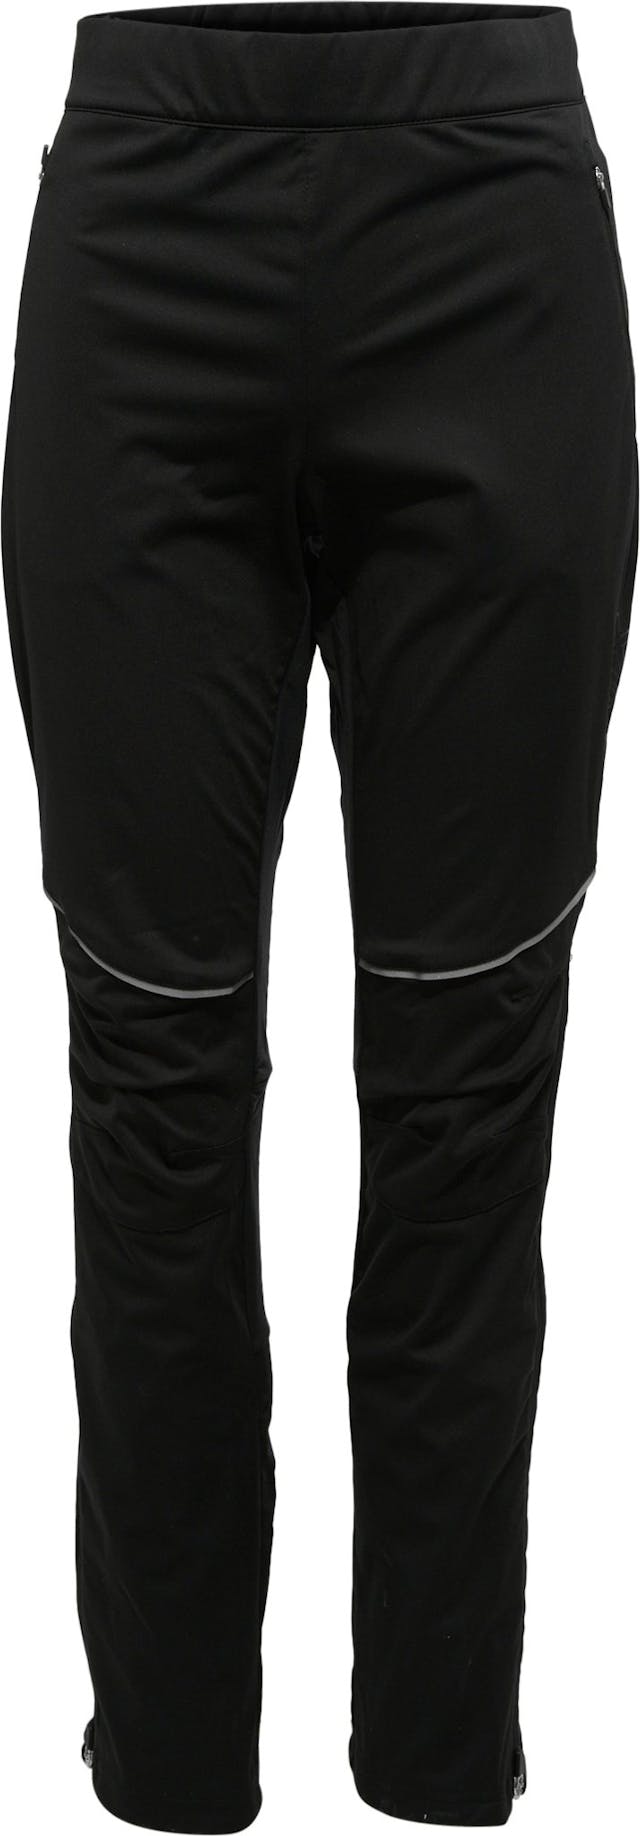 Product image for Solo Full Zip Pants - Men's